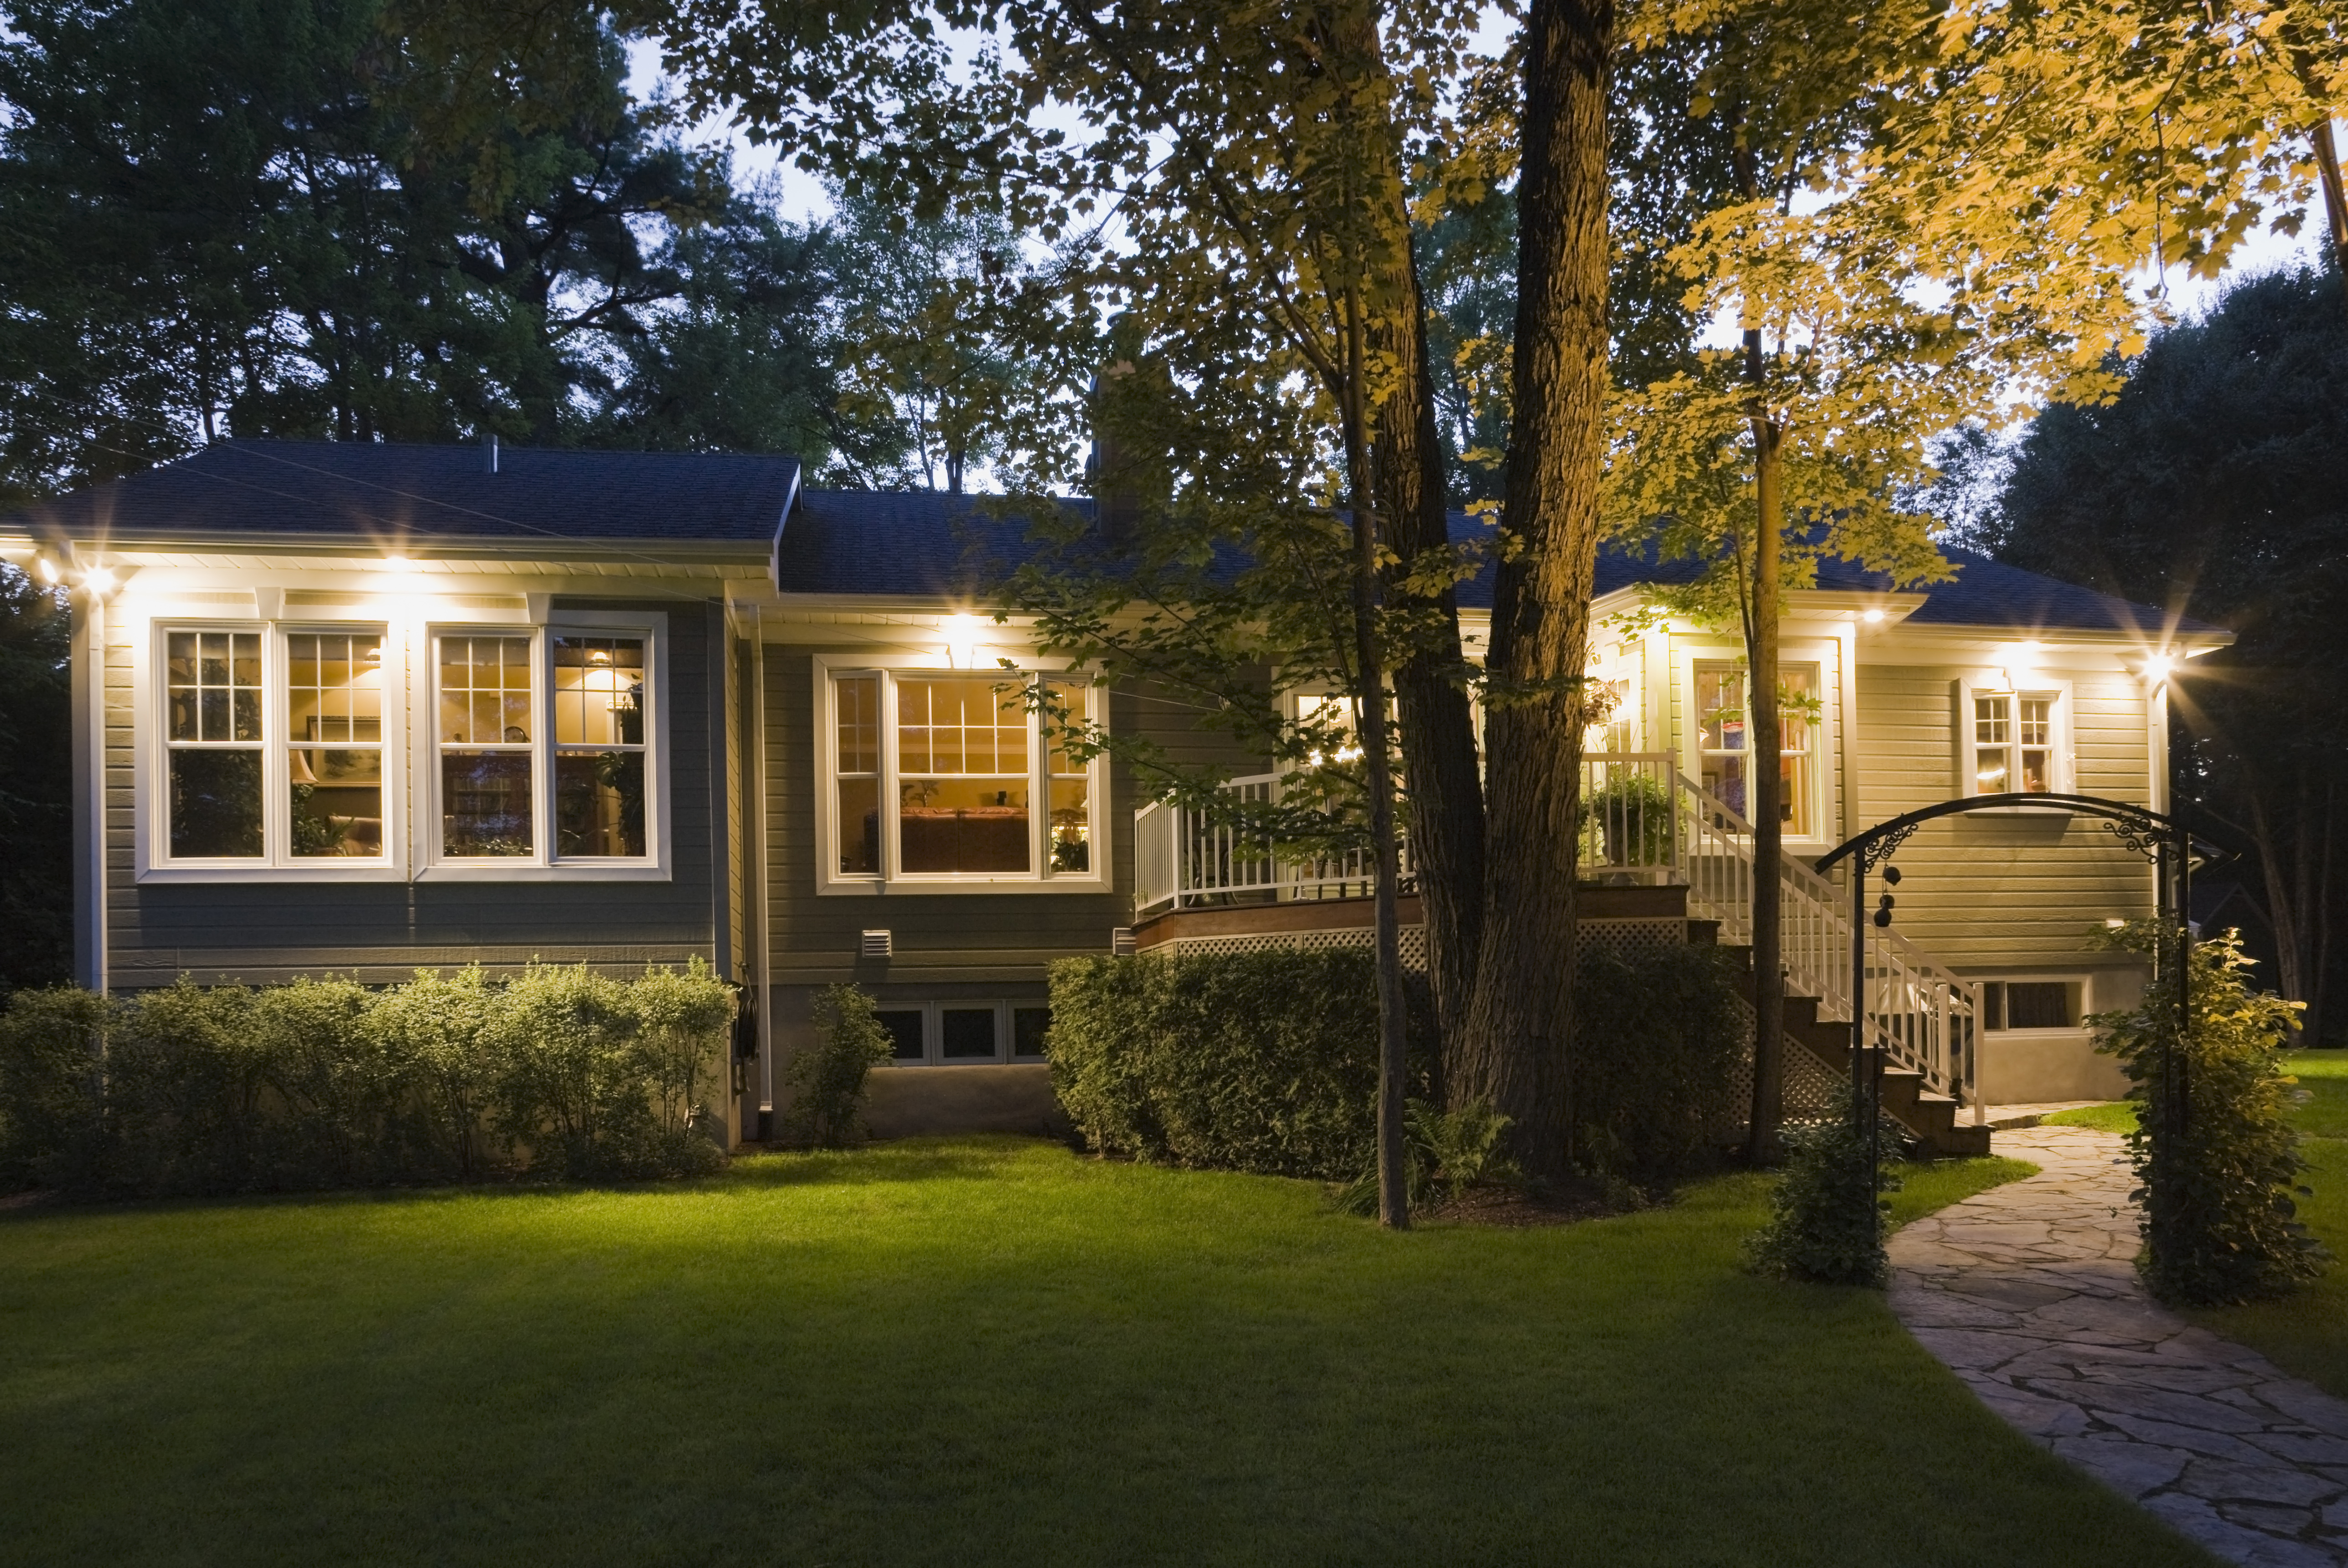 Why won't my outdoor security light turn off?